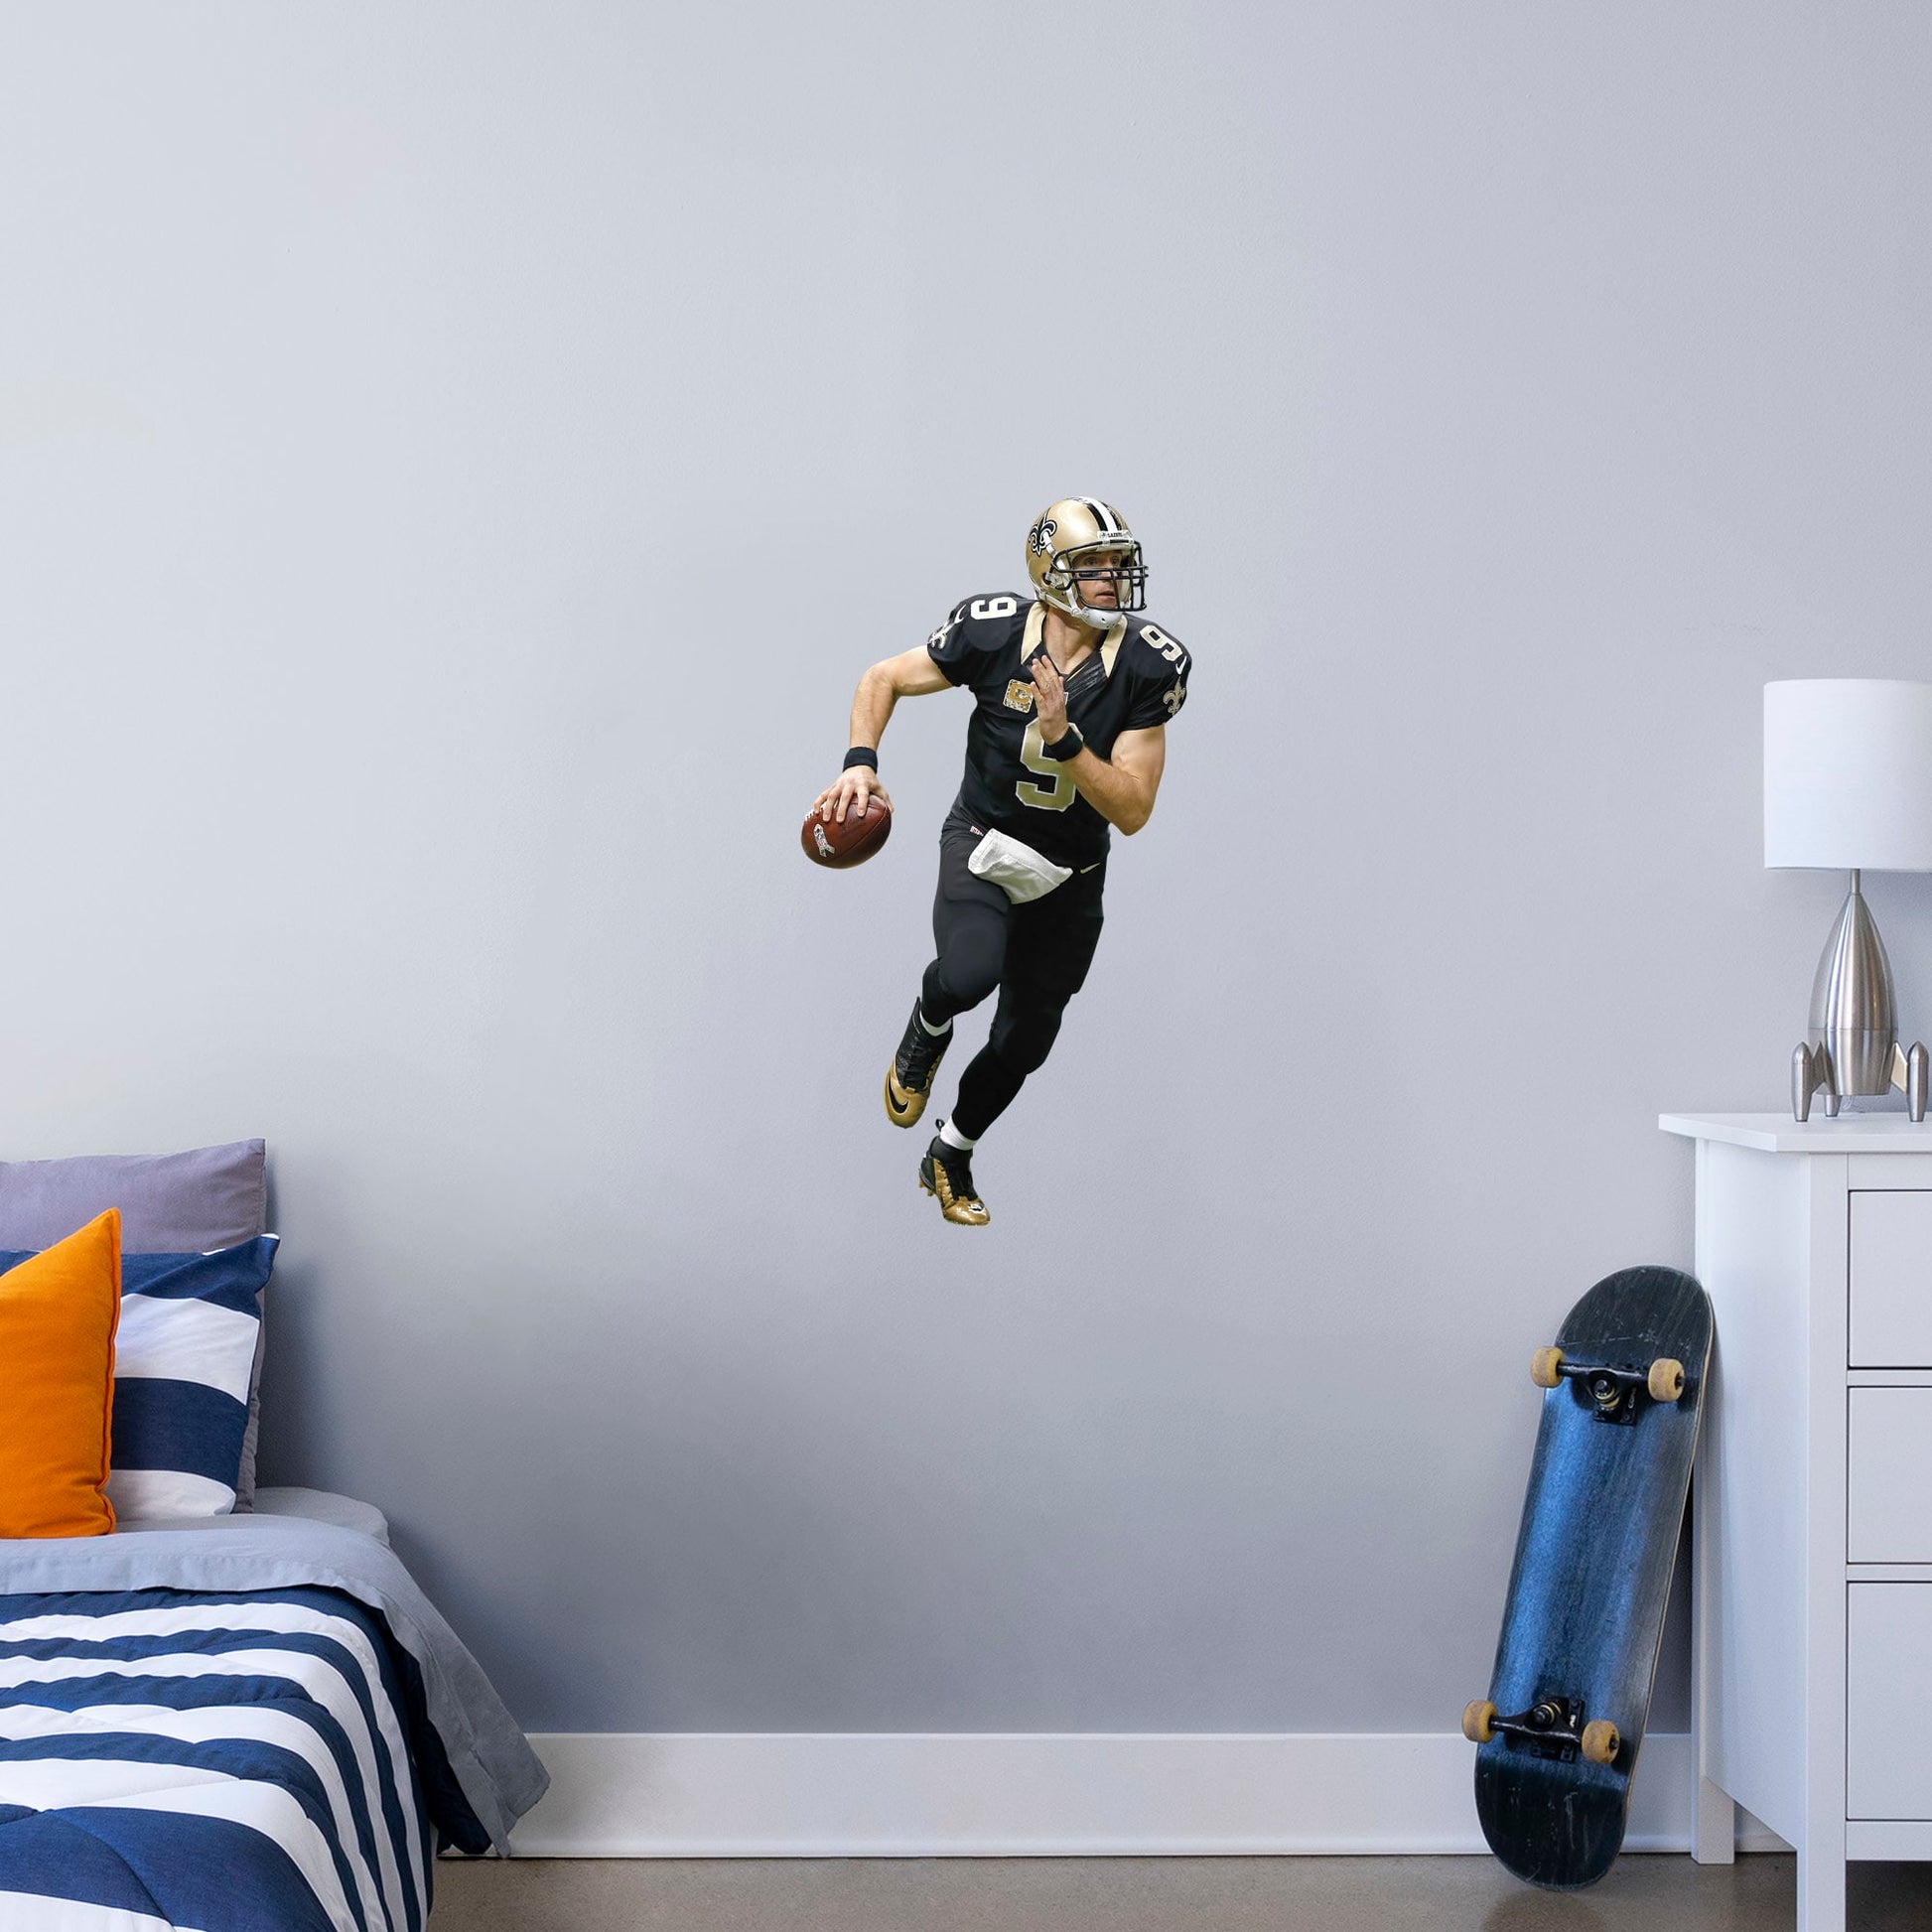 X-Large Athlete + 1 Decal (15"W x 39"H) Super Bowl MVP, NFL Sportsman of the Year, and perennial fan favorite Drew Brees hustles across your man cave wall with this durable vinyl wall decal. Showcasing the Saints' signature black and old gold with the home game uniform, this decal turns your sports bar, bedroom, or dorm room into your personal Superdome. The reusable, high quality vinyl won't damage walls, making it the perfect choice if you need to take your Saints fandom on the road.